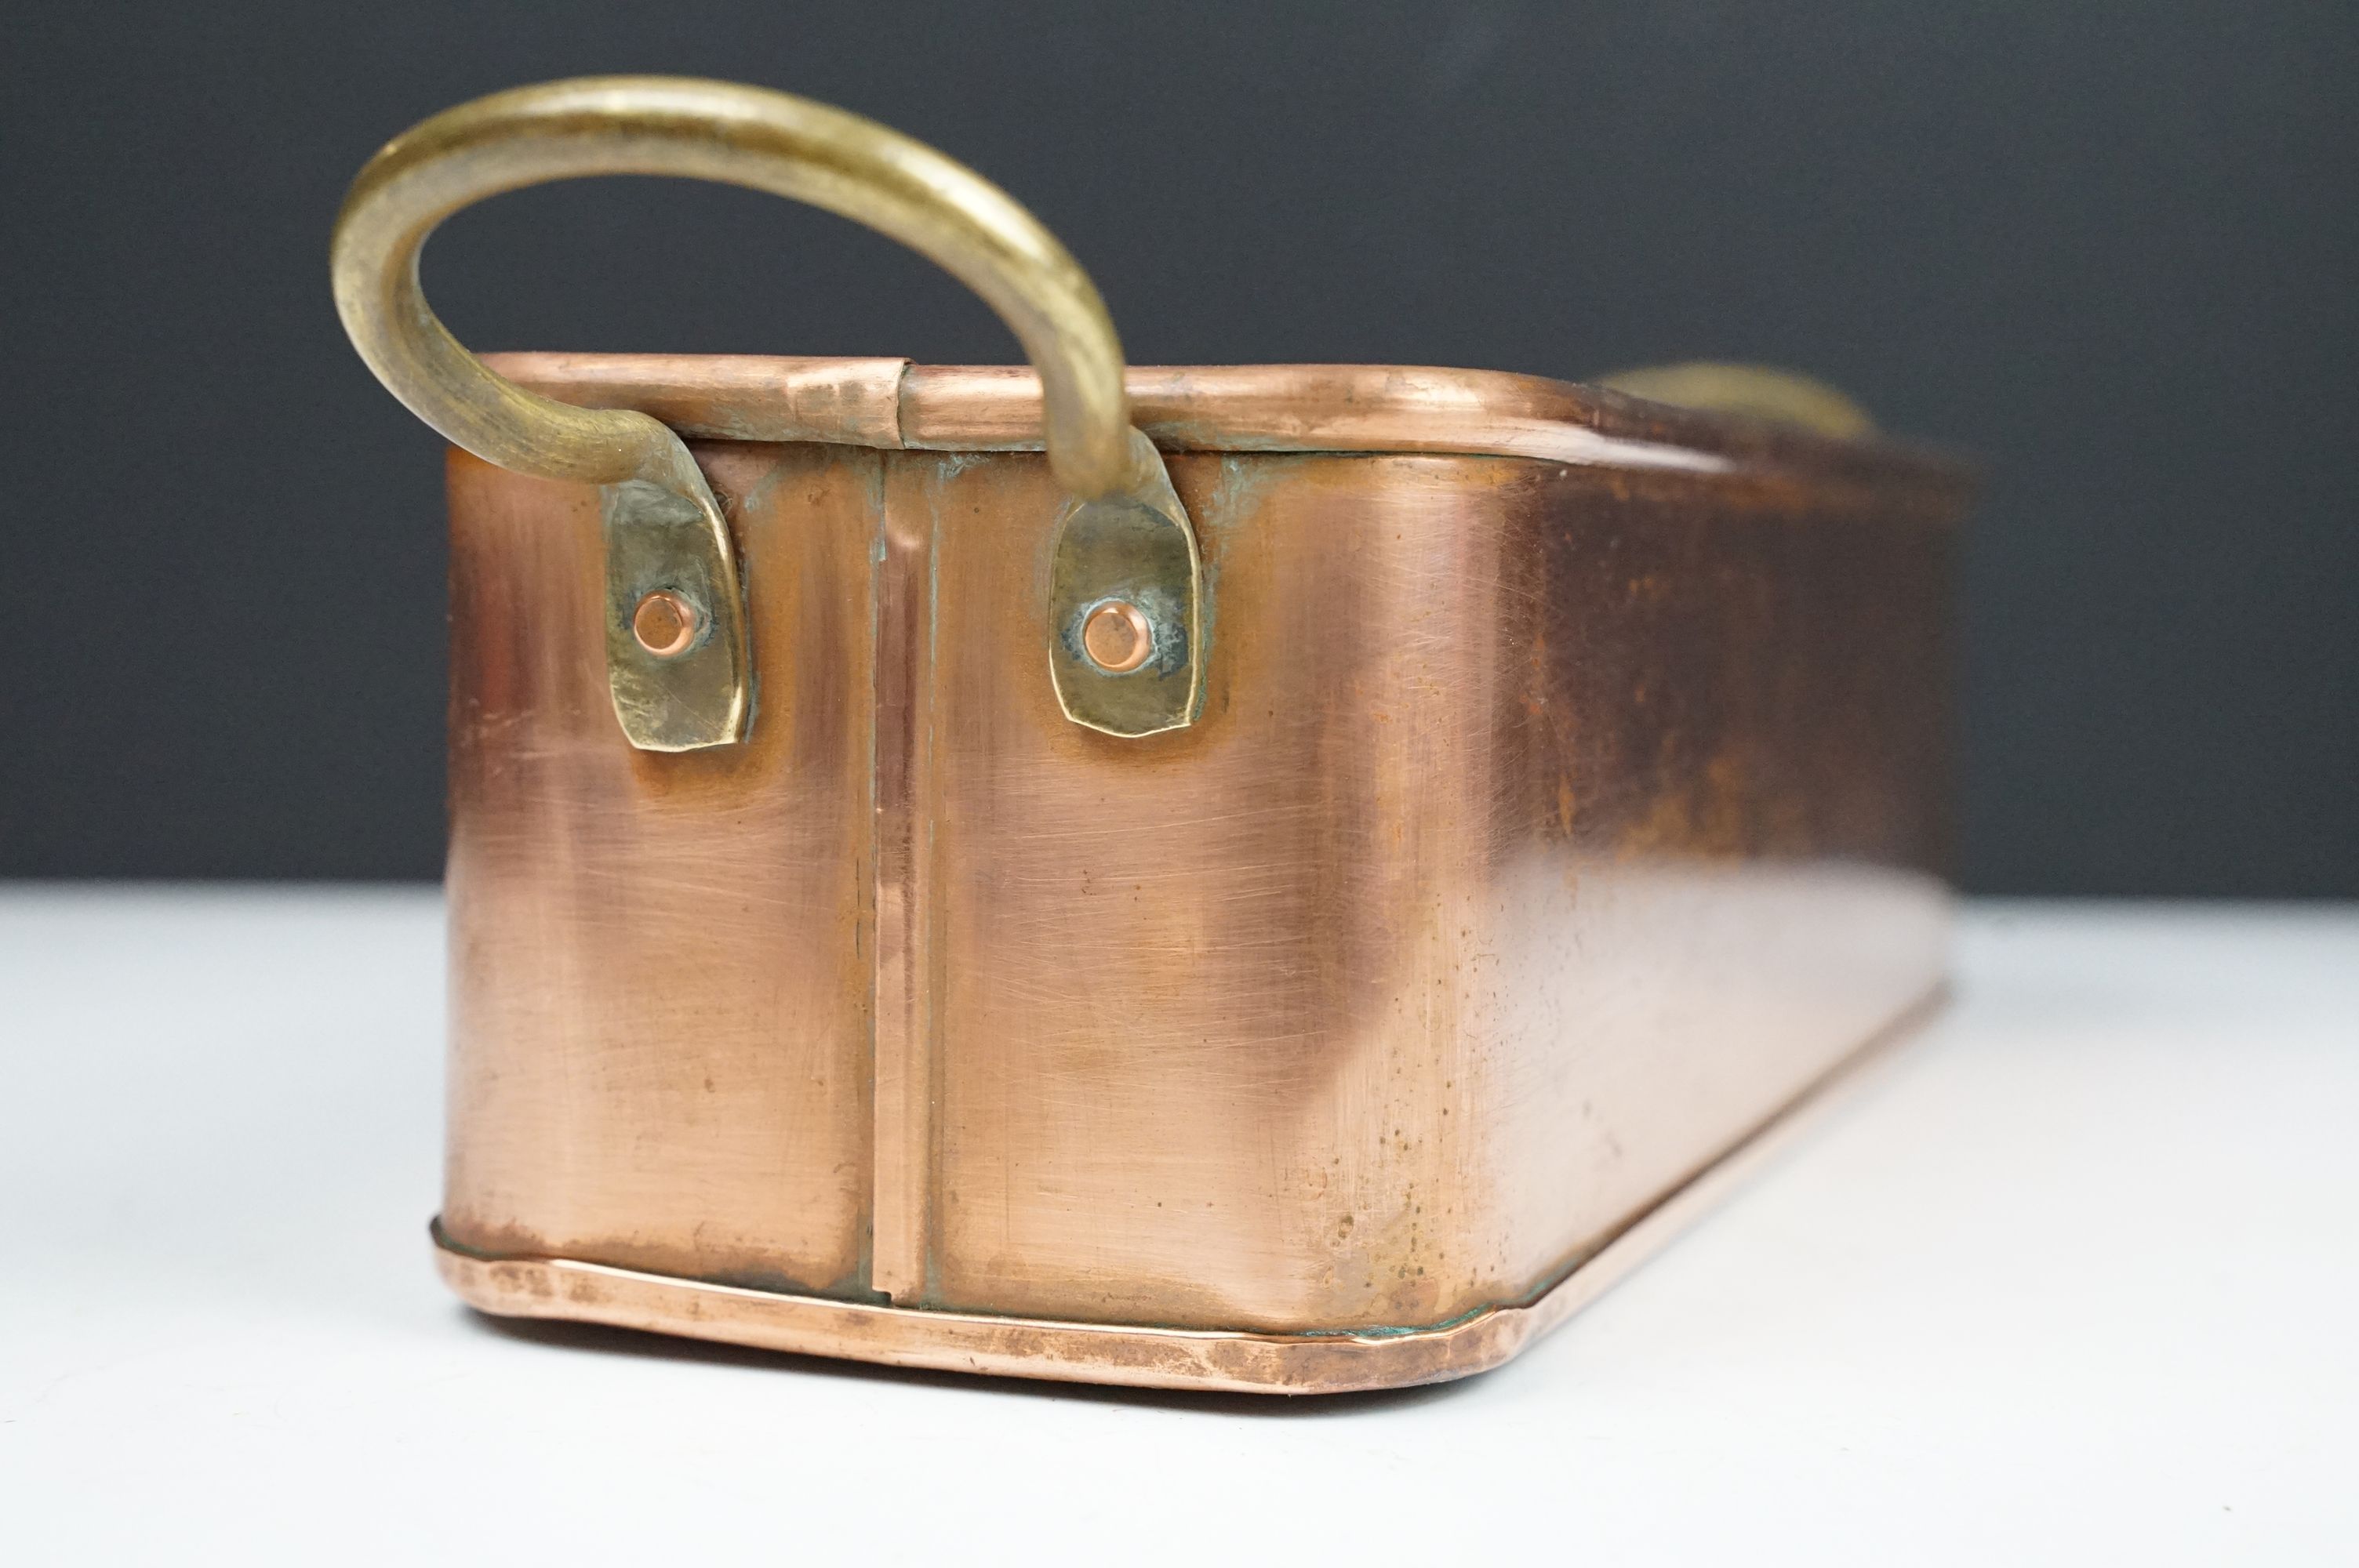 Copper Rectangular Planter with rolled rim and two brass loop handles, 39cm long - Image 5 of 5